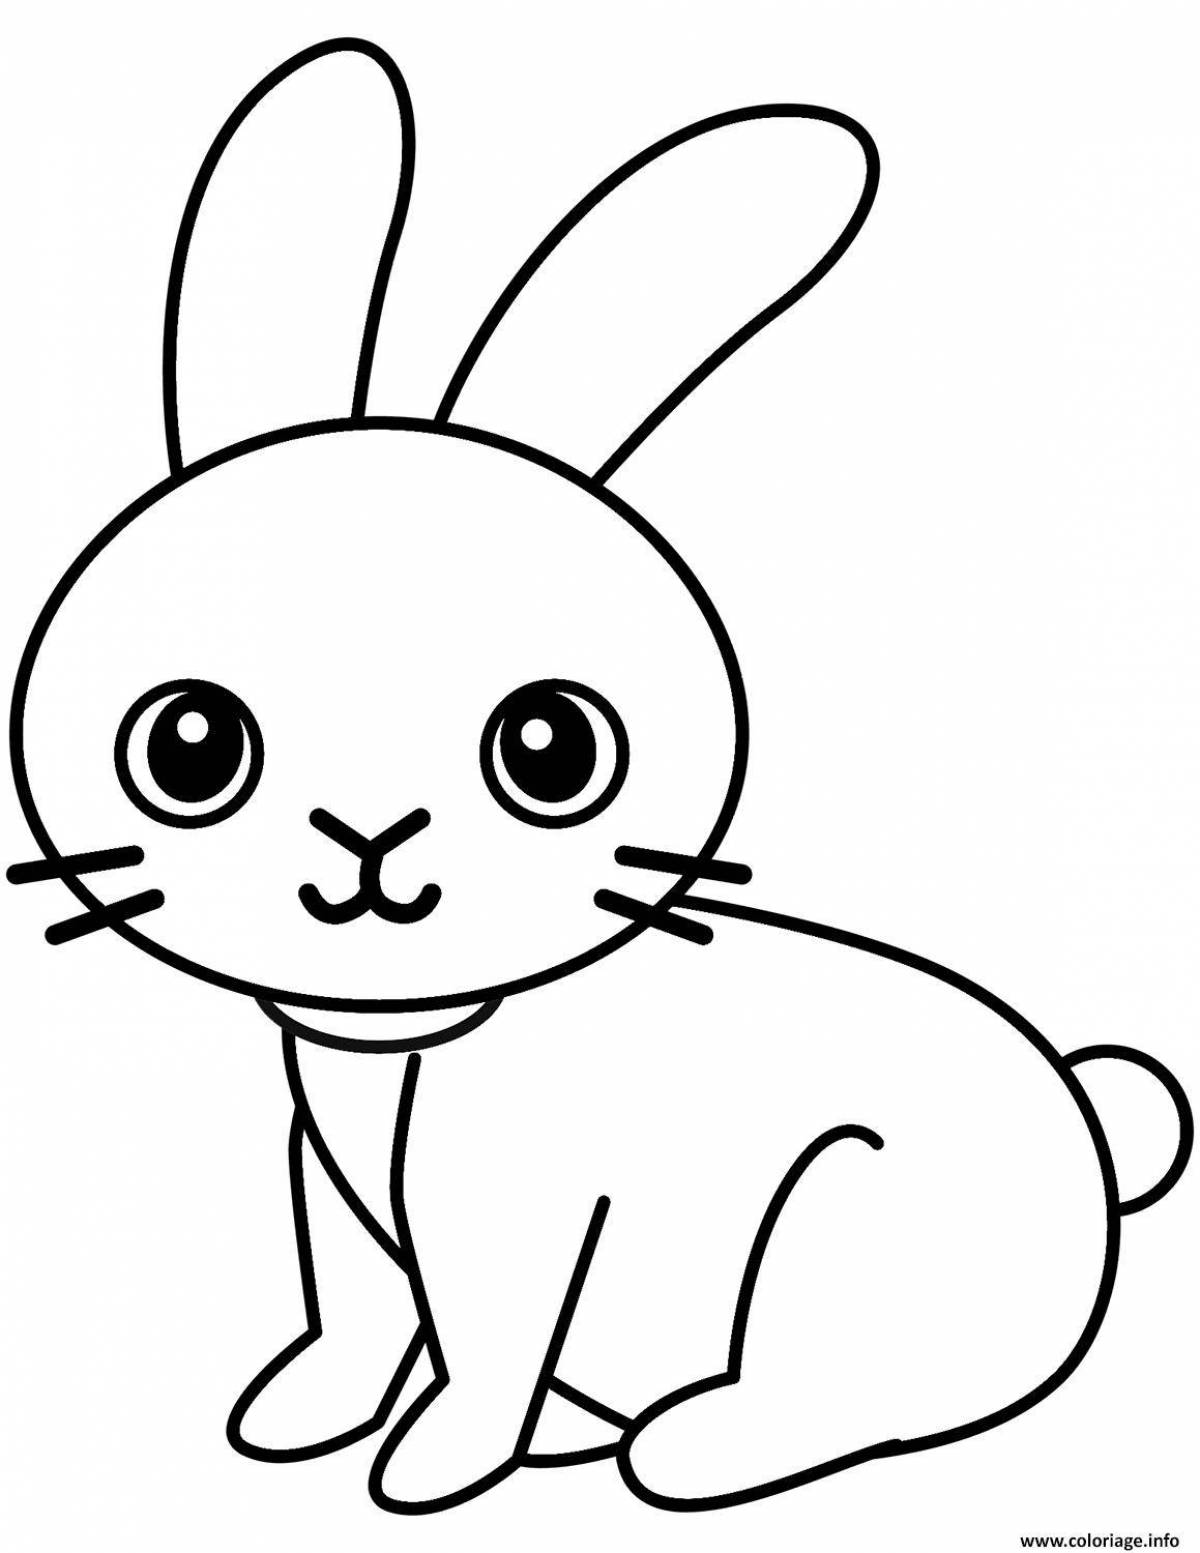 Fancy rabbit and cat coloring